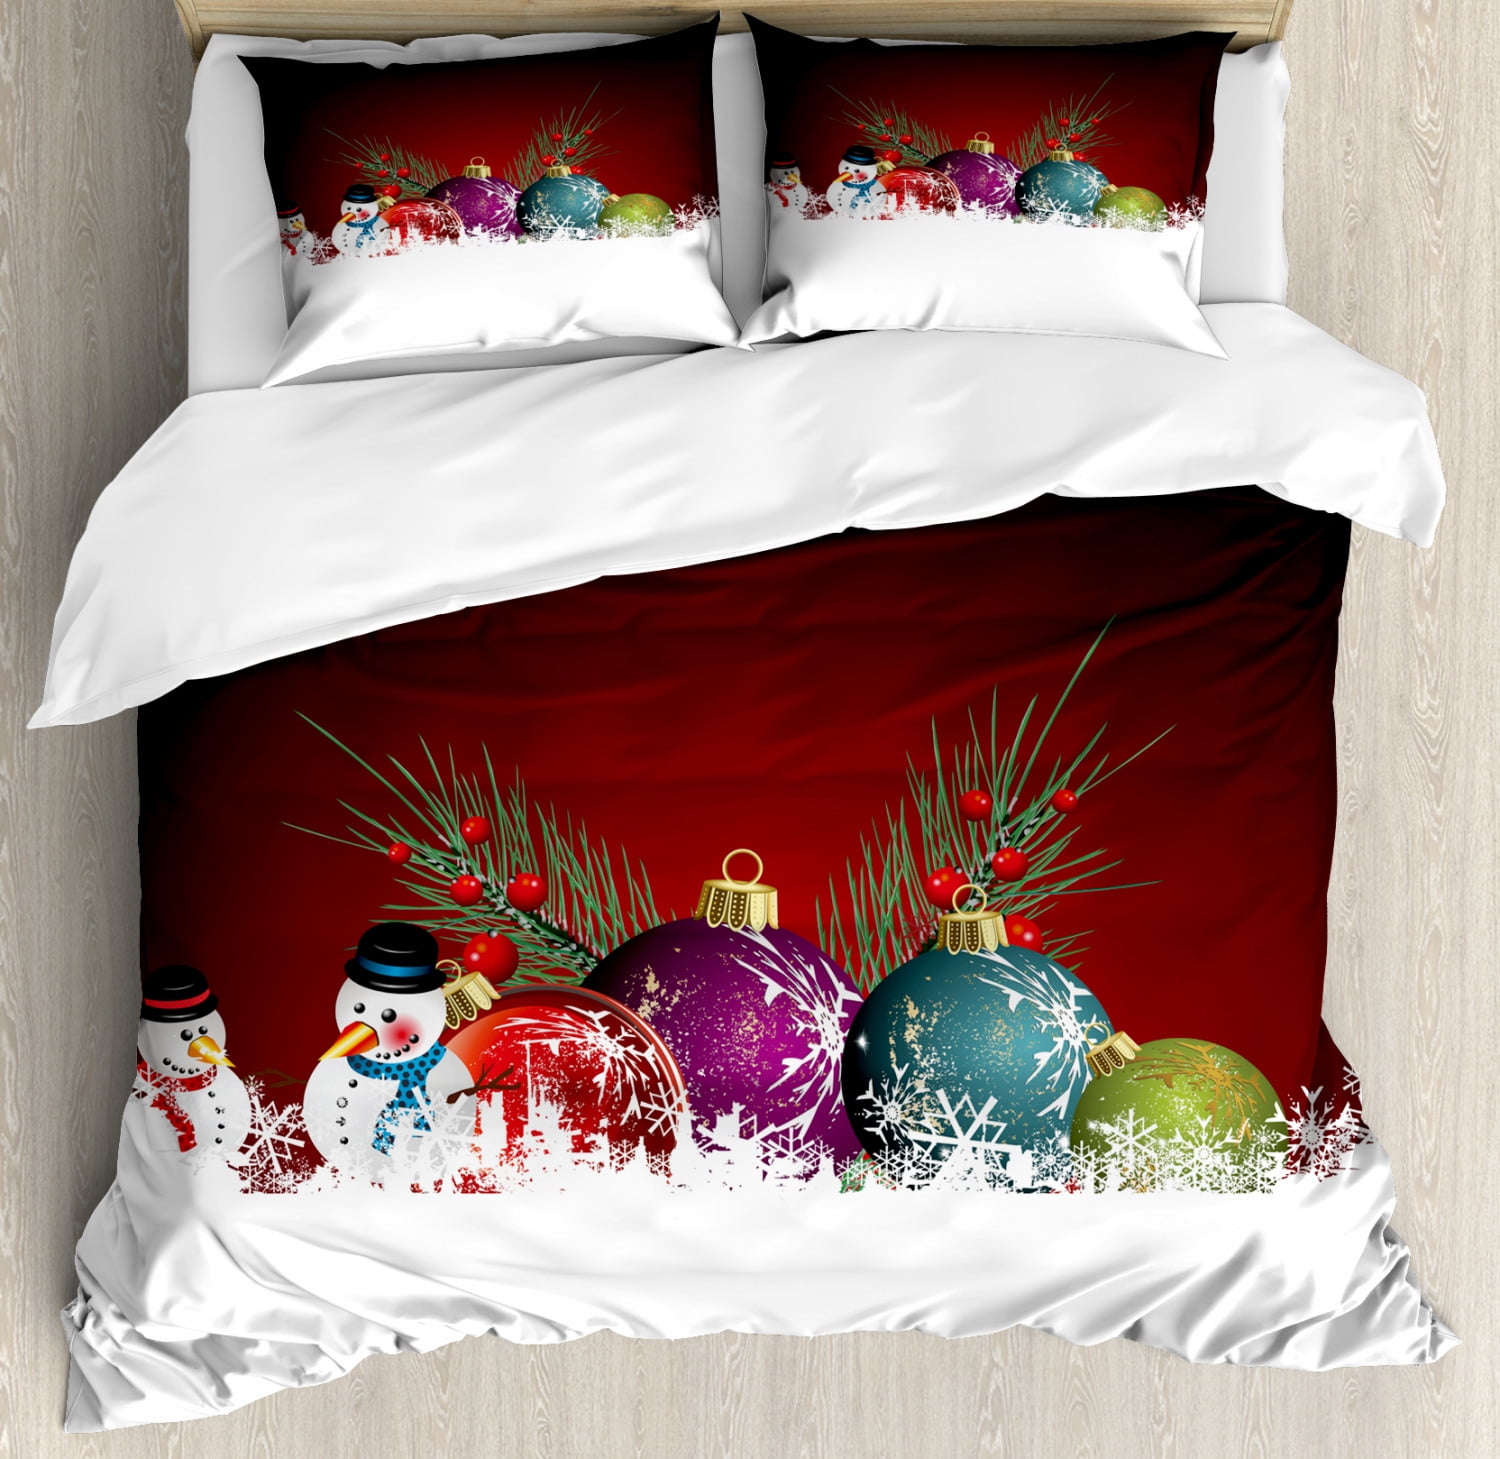 Christmas Duvet Cover Set Digitally Composed Xmas Pattern With